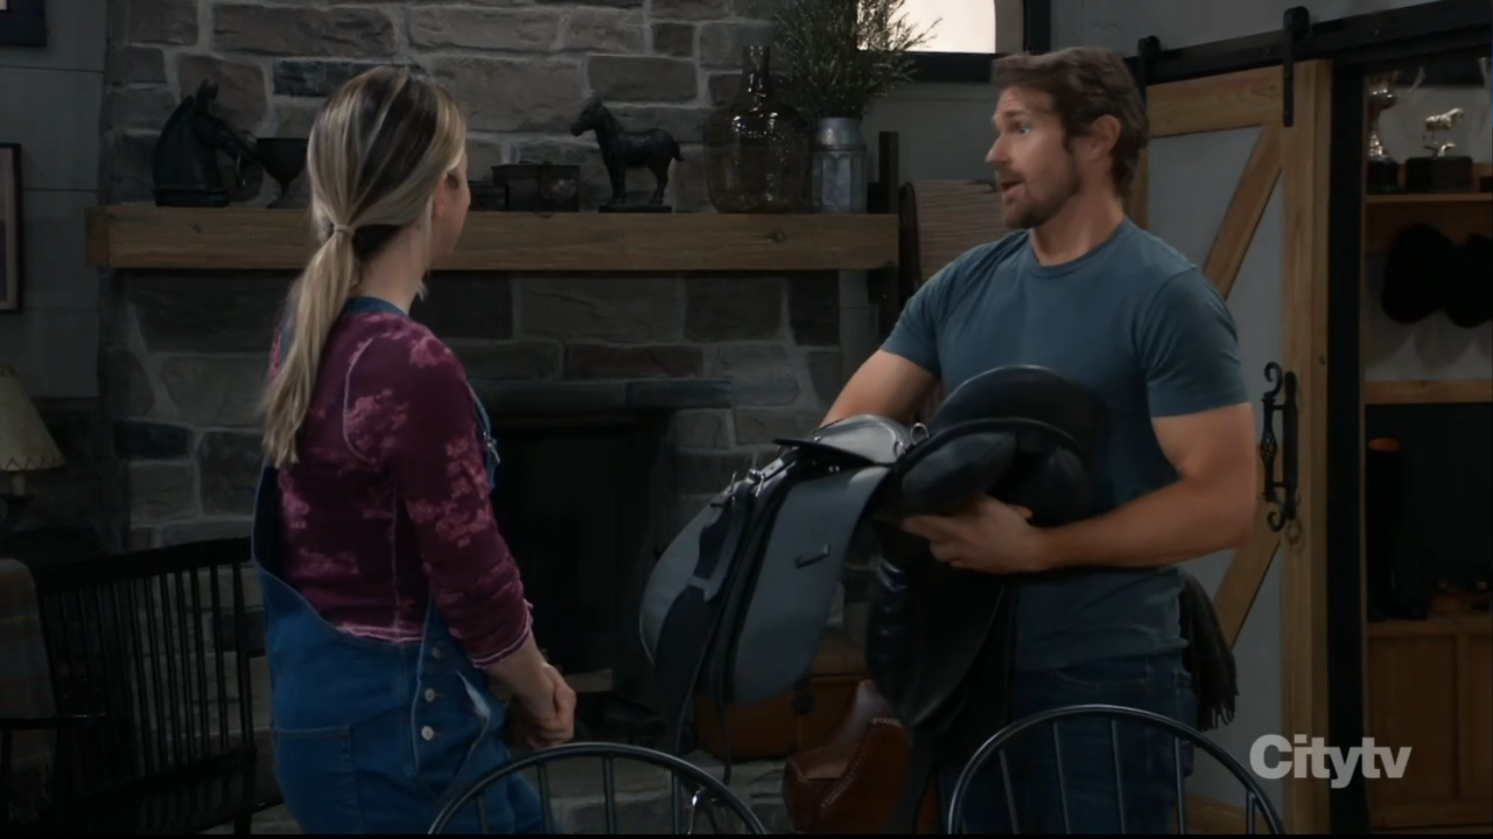 cody with the saddle